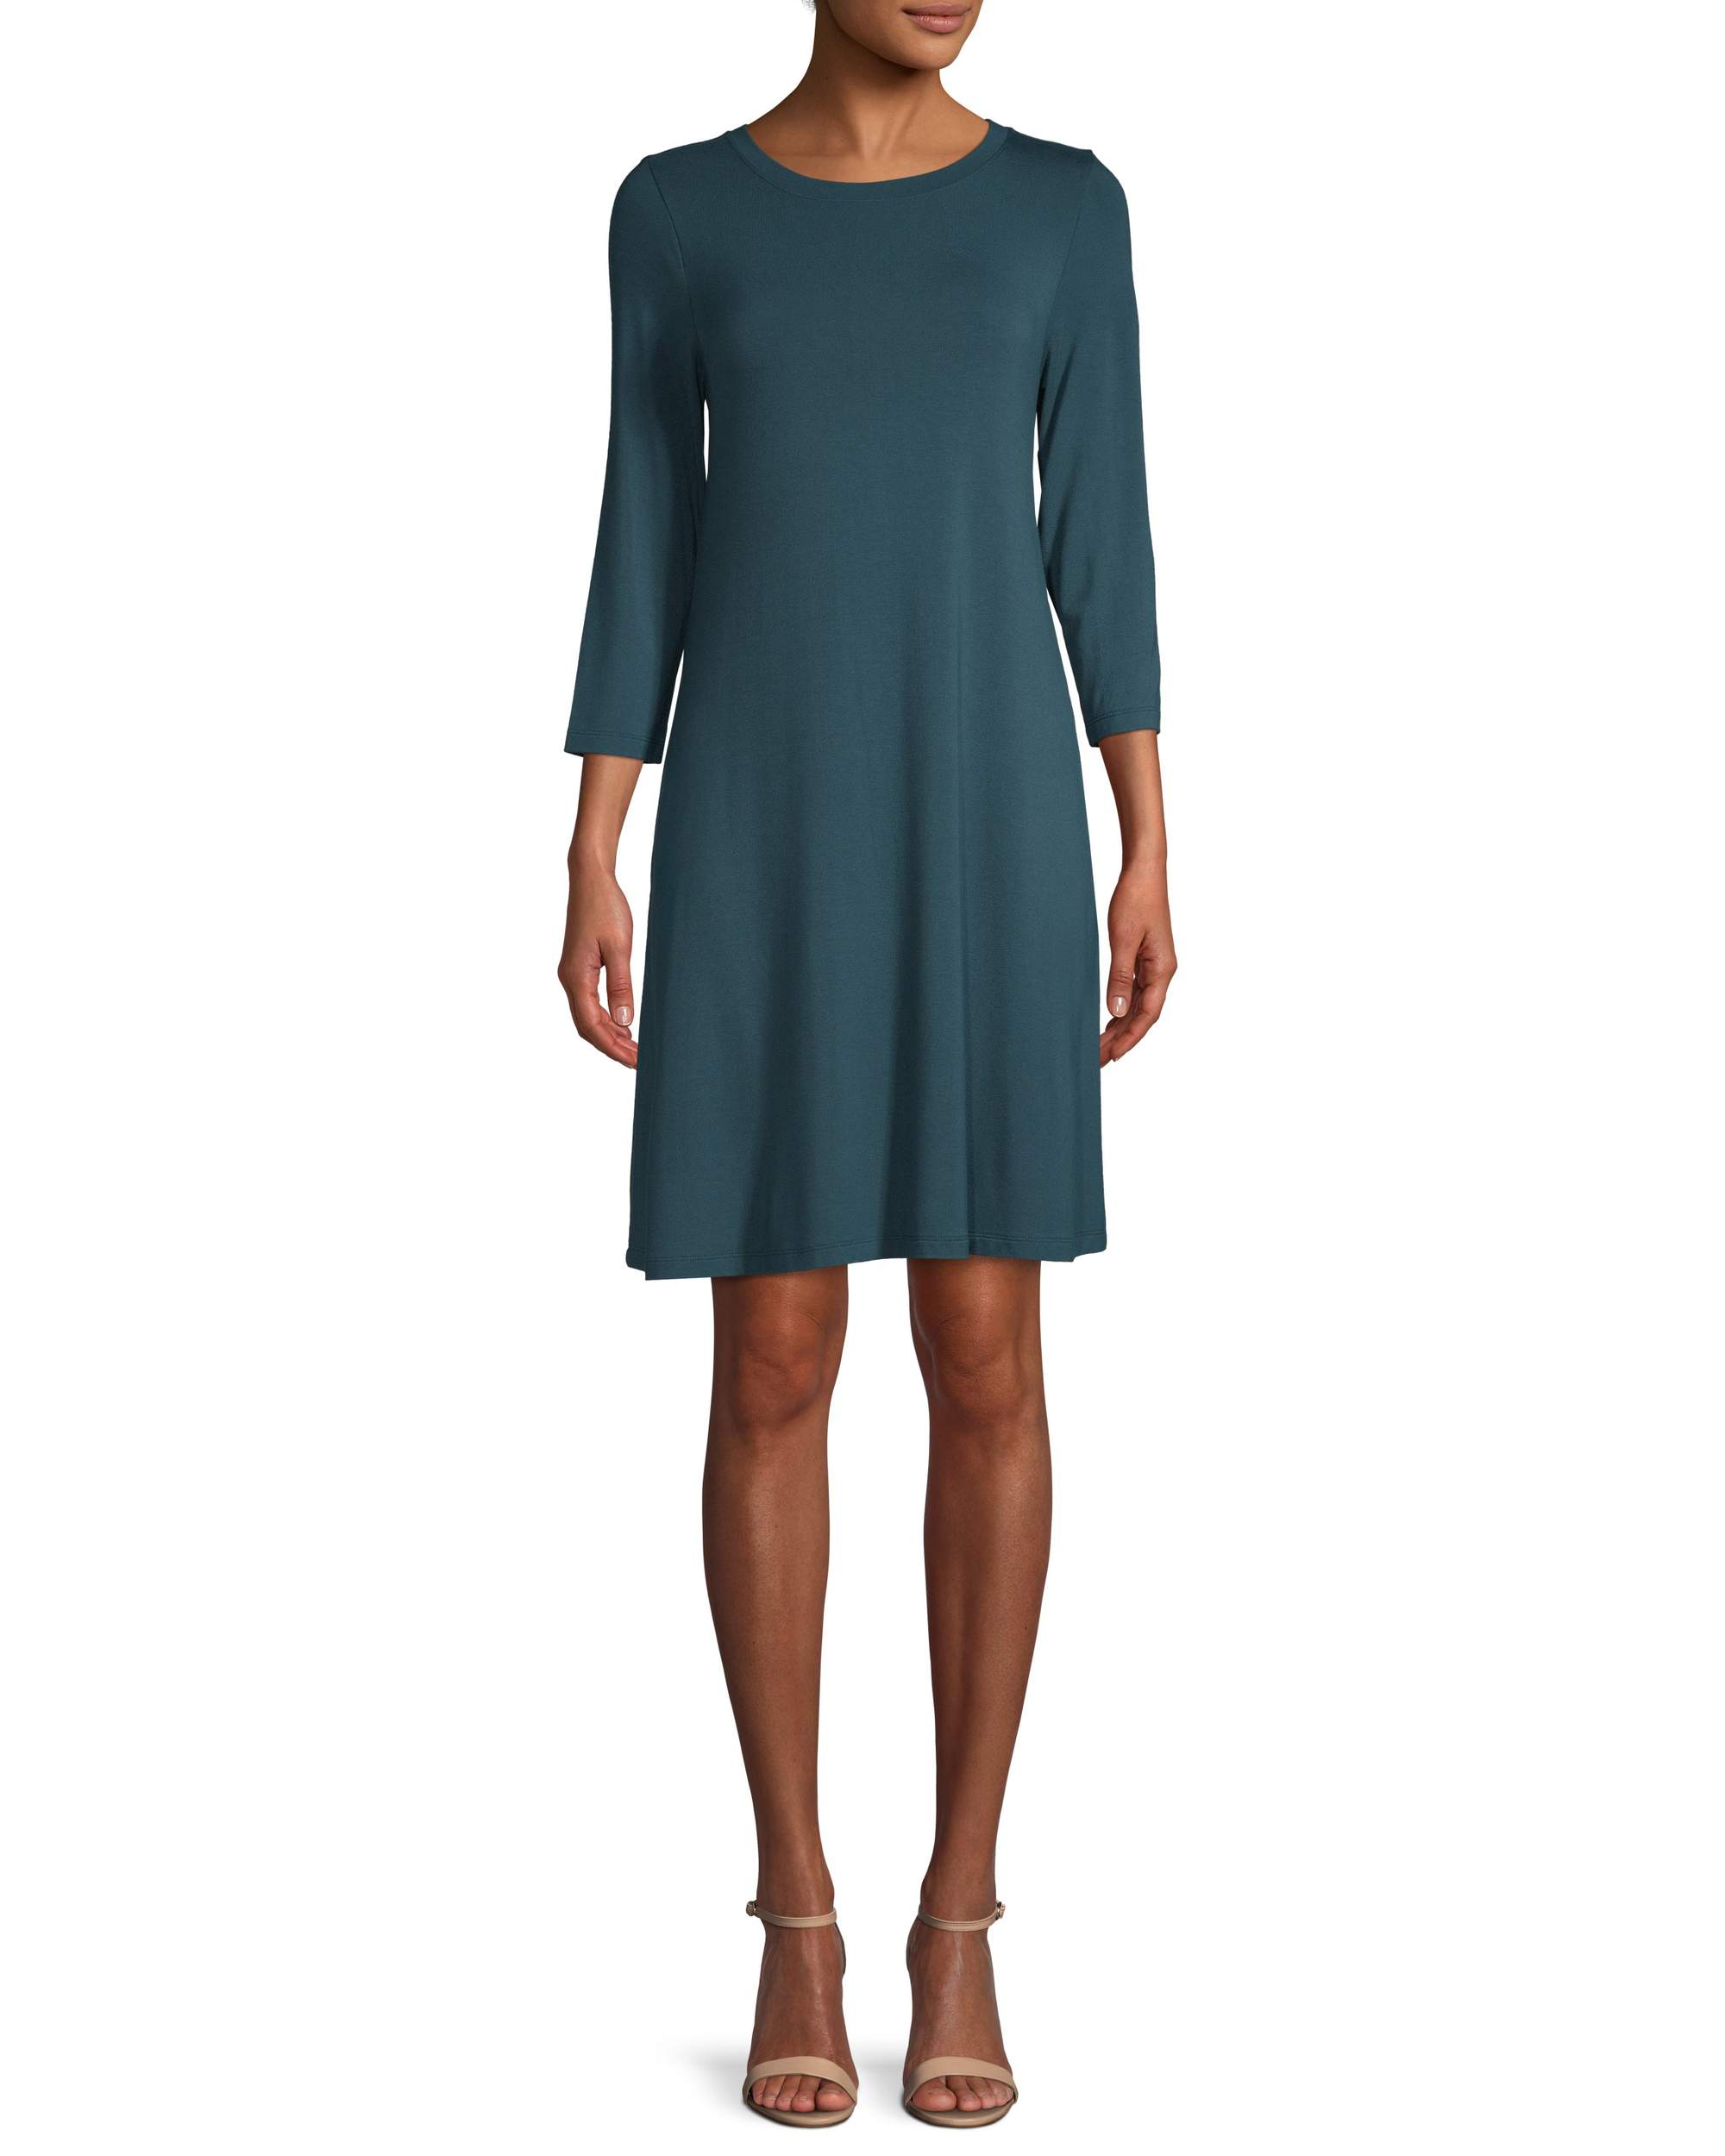 The Everyday No-Fuss Dresses That'll Keep You Cozy This Fall | Essence